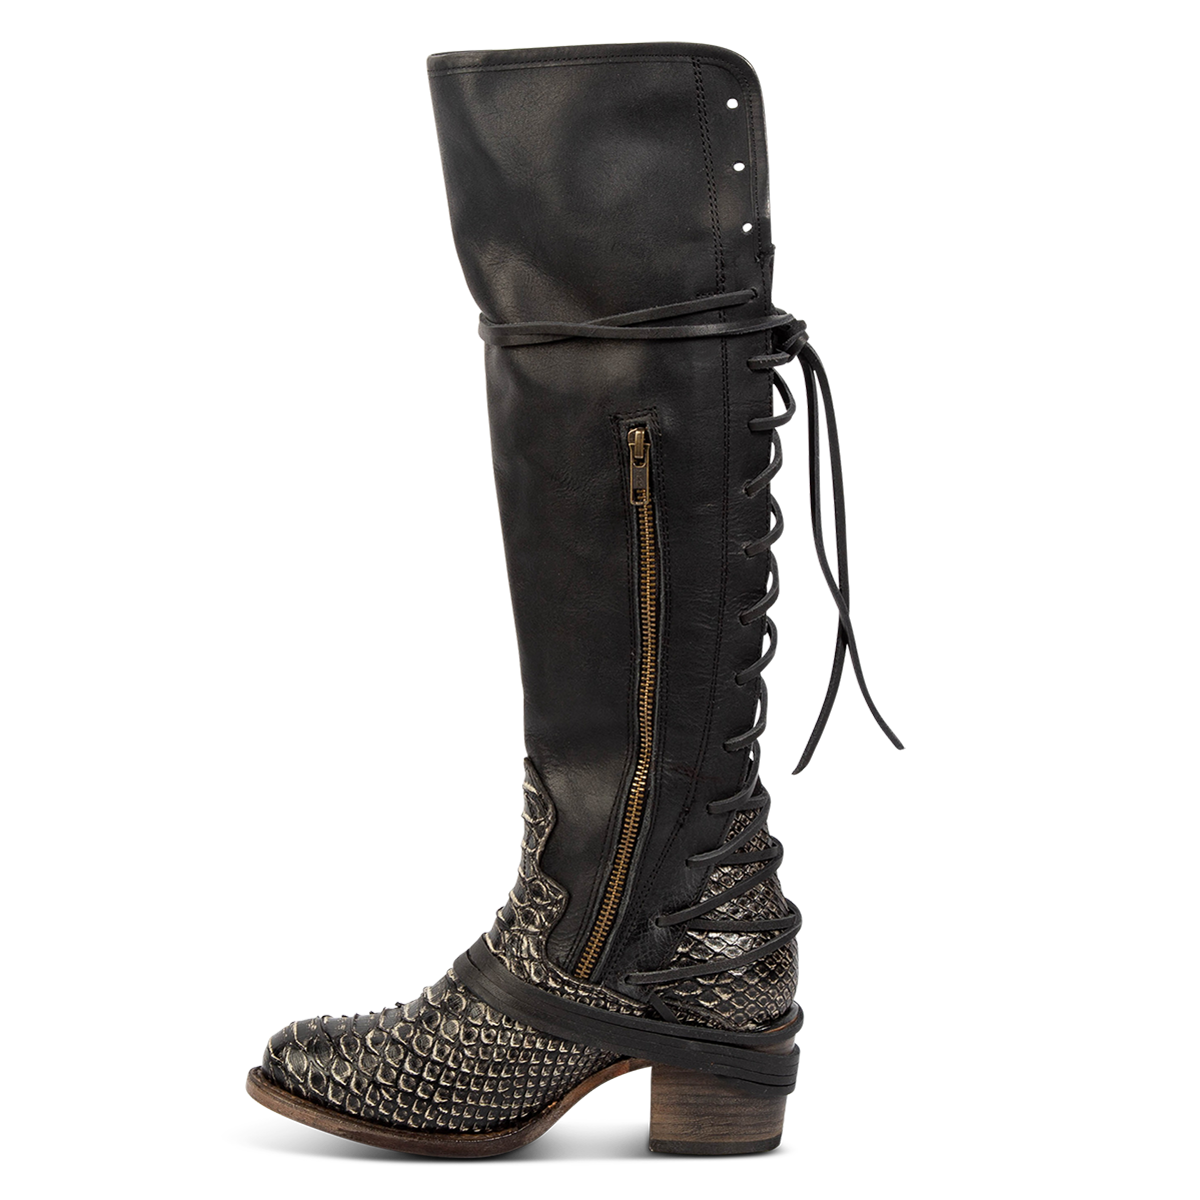 Inside view showing working brass zip closure and adjustable wrap around laces on FREEBIRD women's Coal grey python leather tall boot